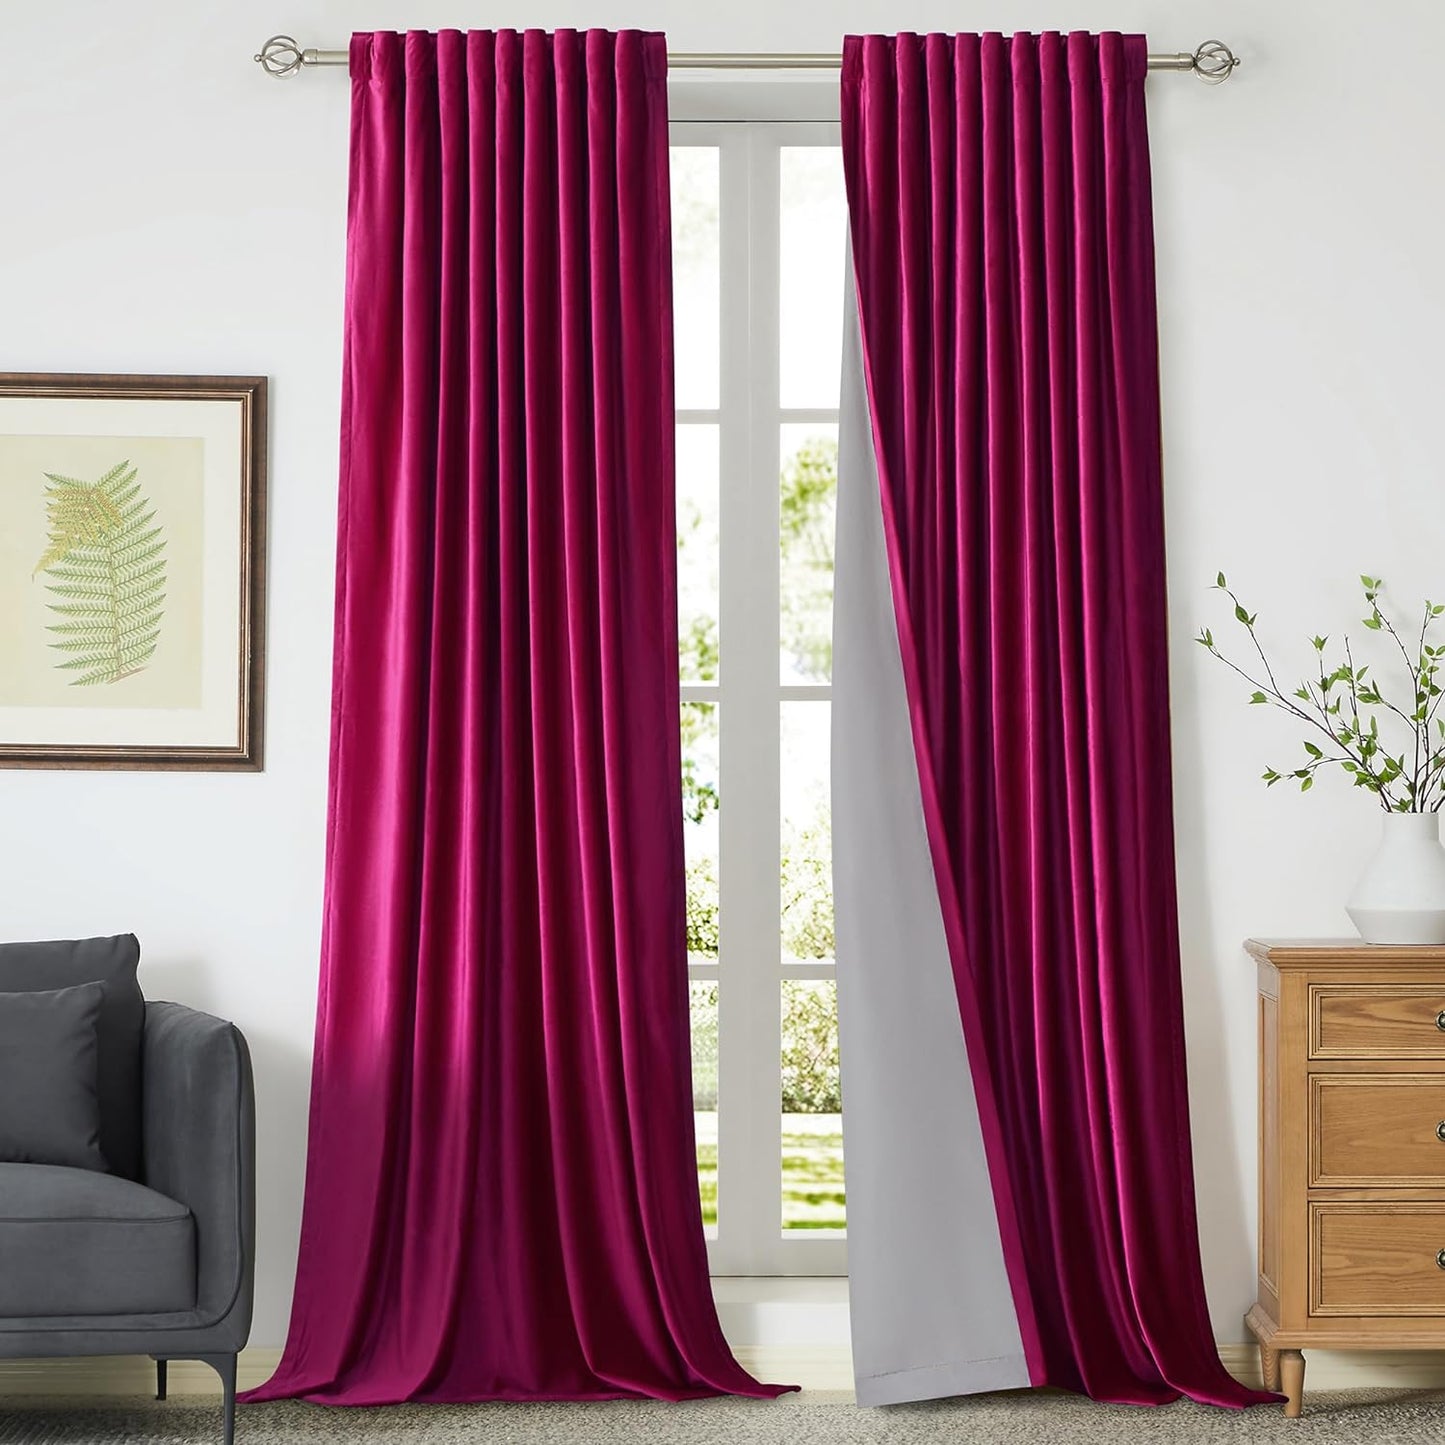 100% Blackout Ivory off White Velvet Curtains 108 Inch Long for Living Room,Set of 2 Panels Liner Rod Pocket Back Tab Thermal Window Drapes Room Darkening Heavy Decorative Curtains for Bedroom  PRIMROSE Hot Pink 52X96 Inches 